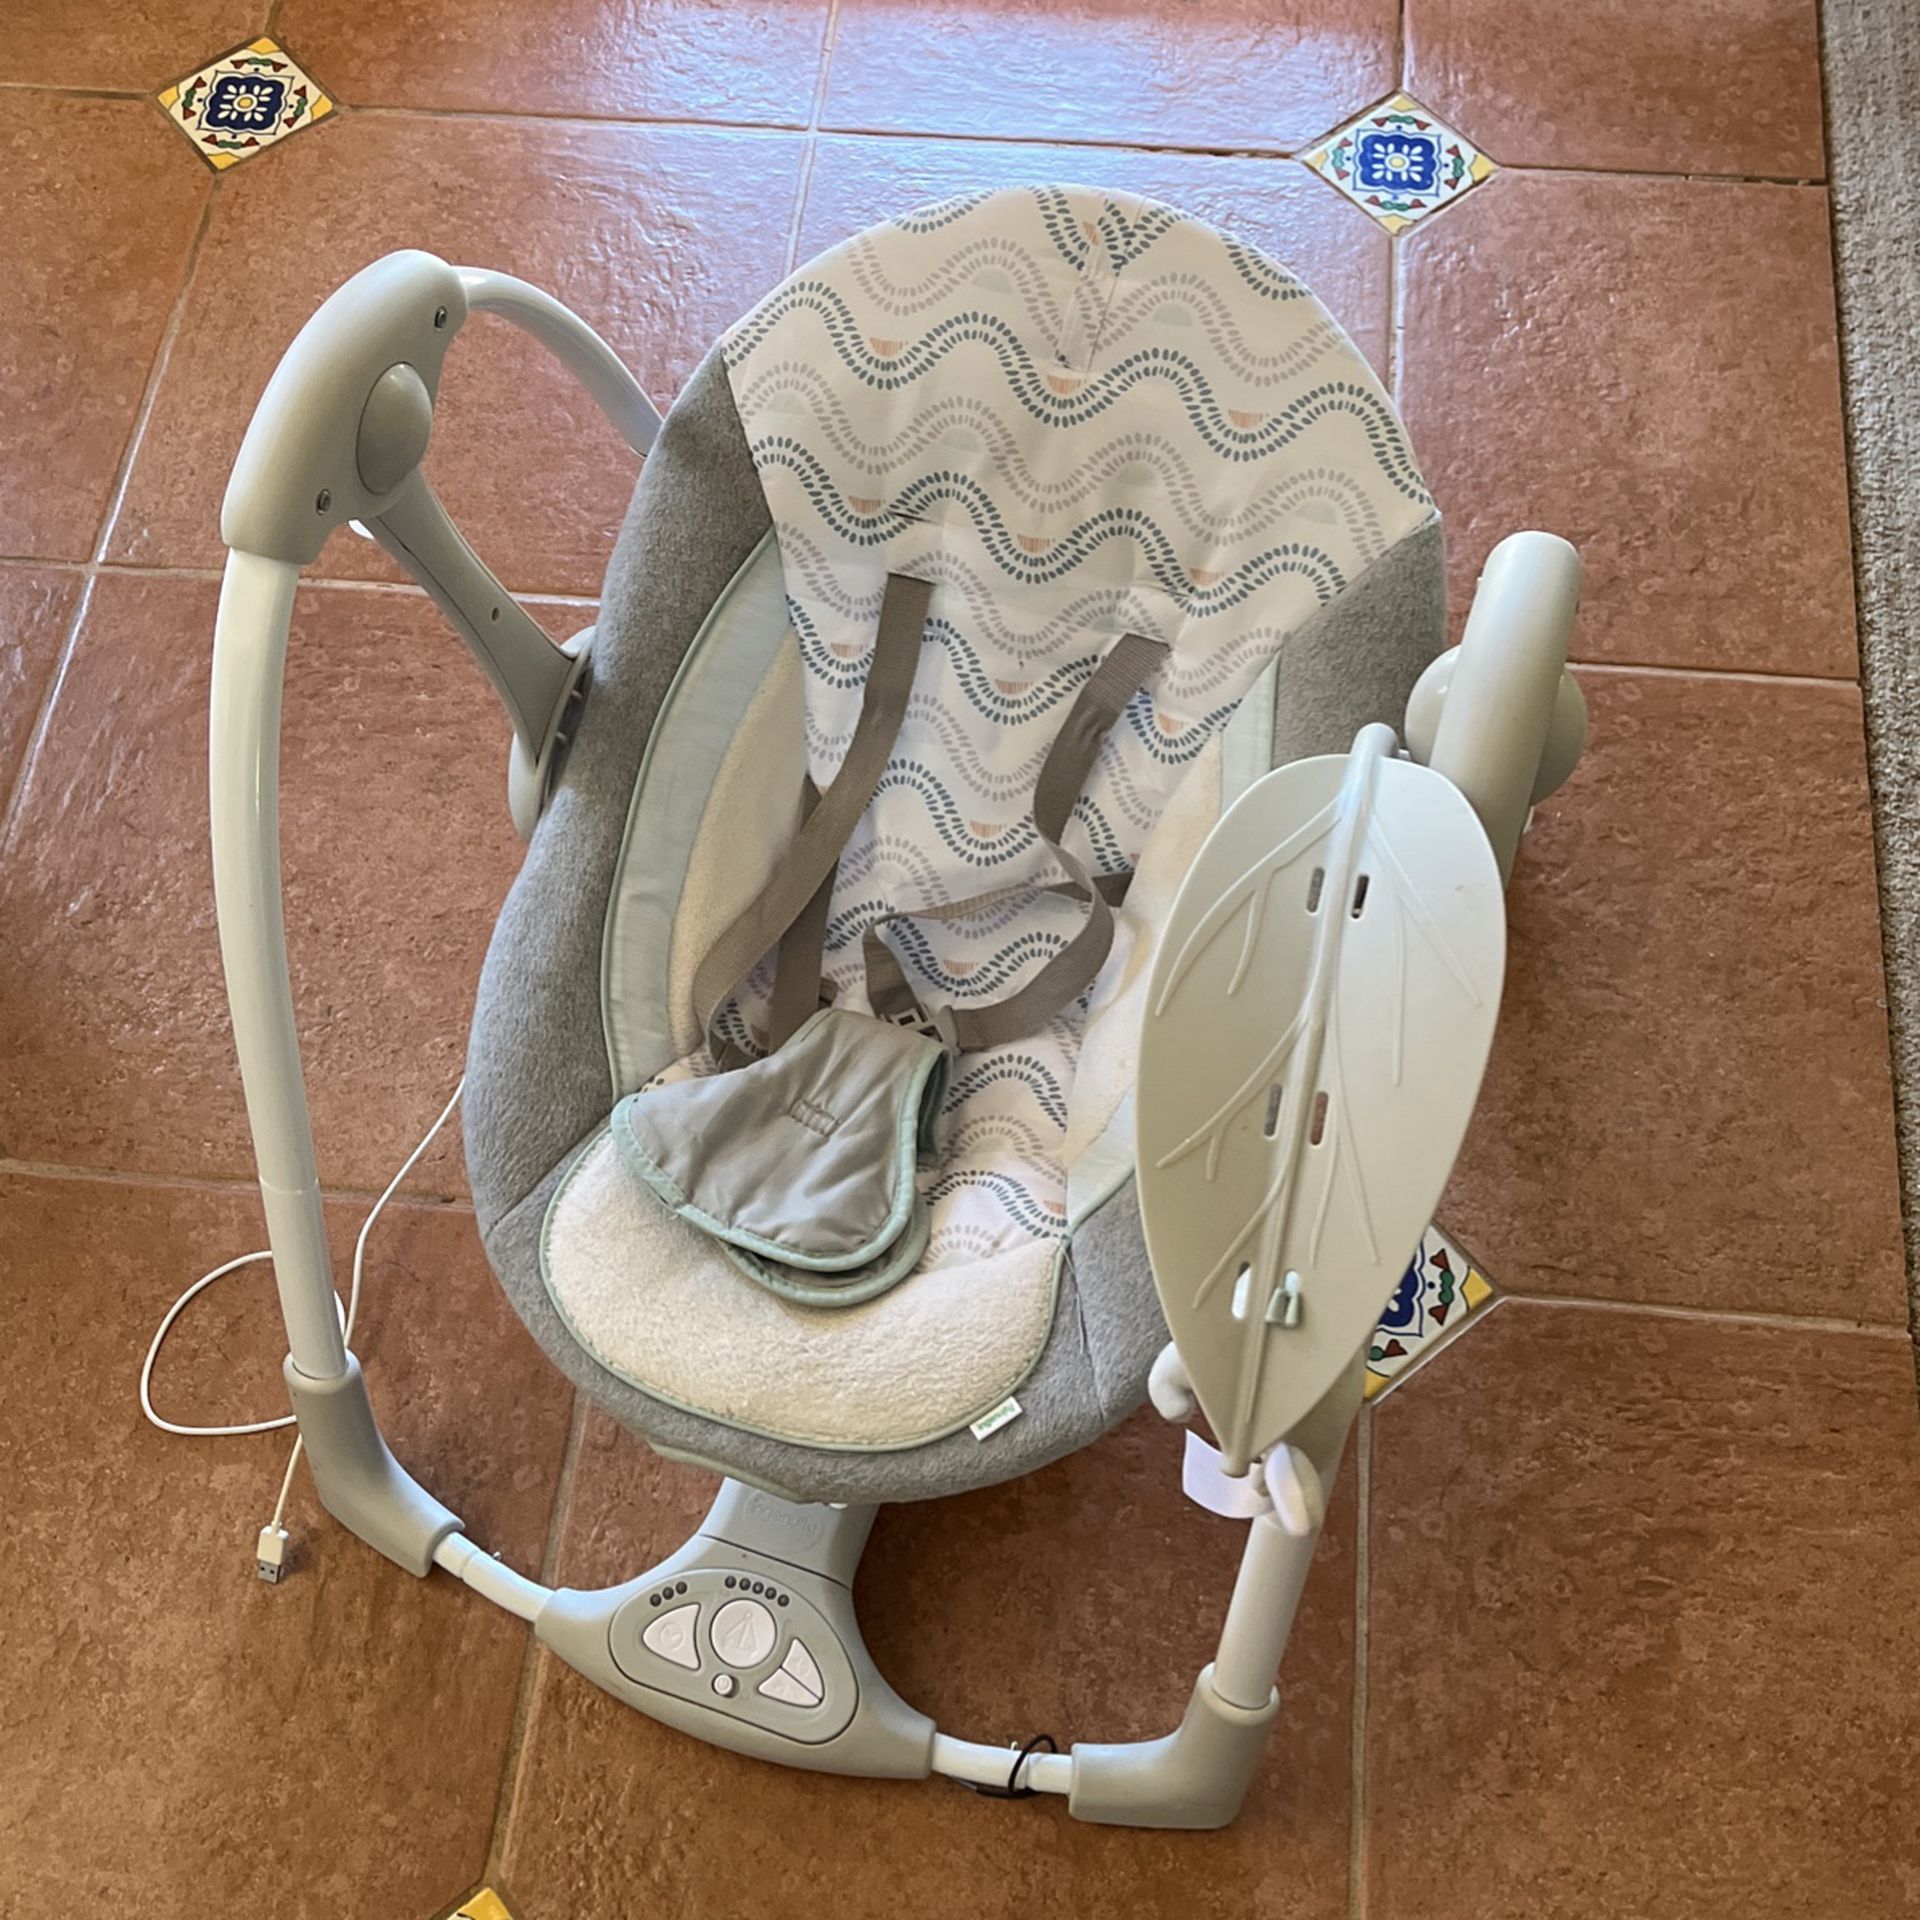 Compact baby swing